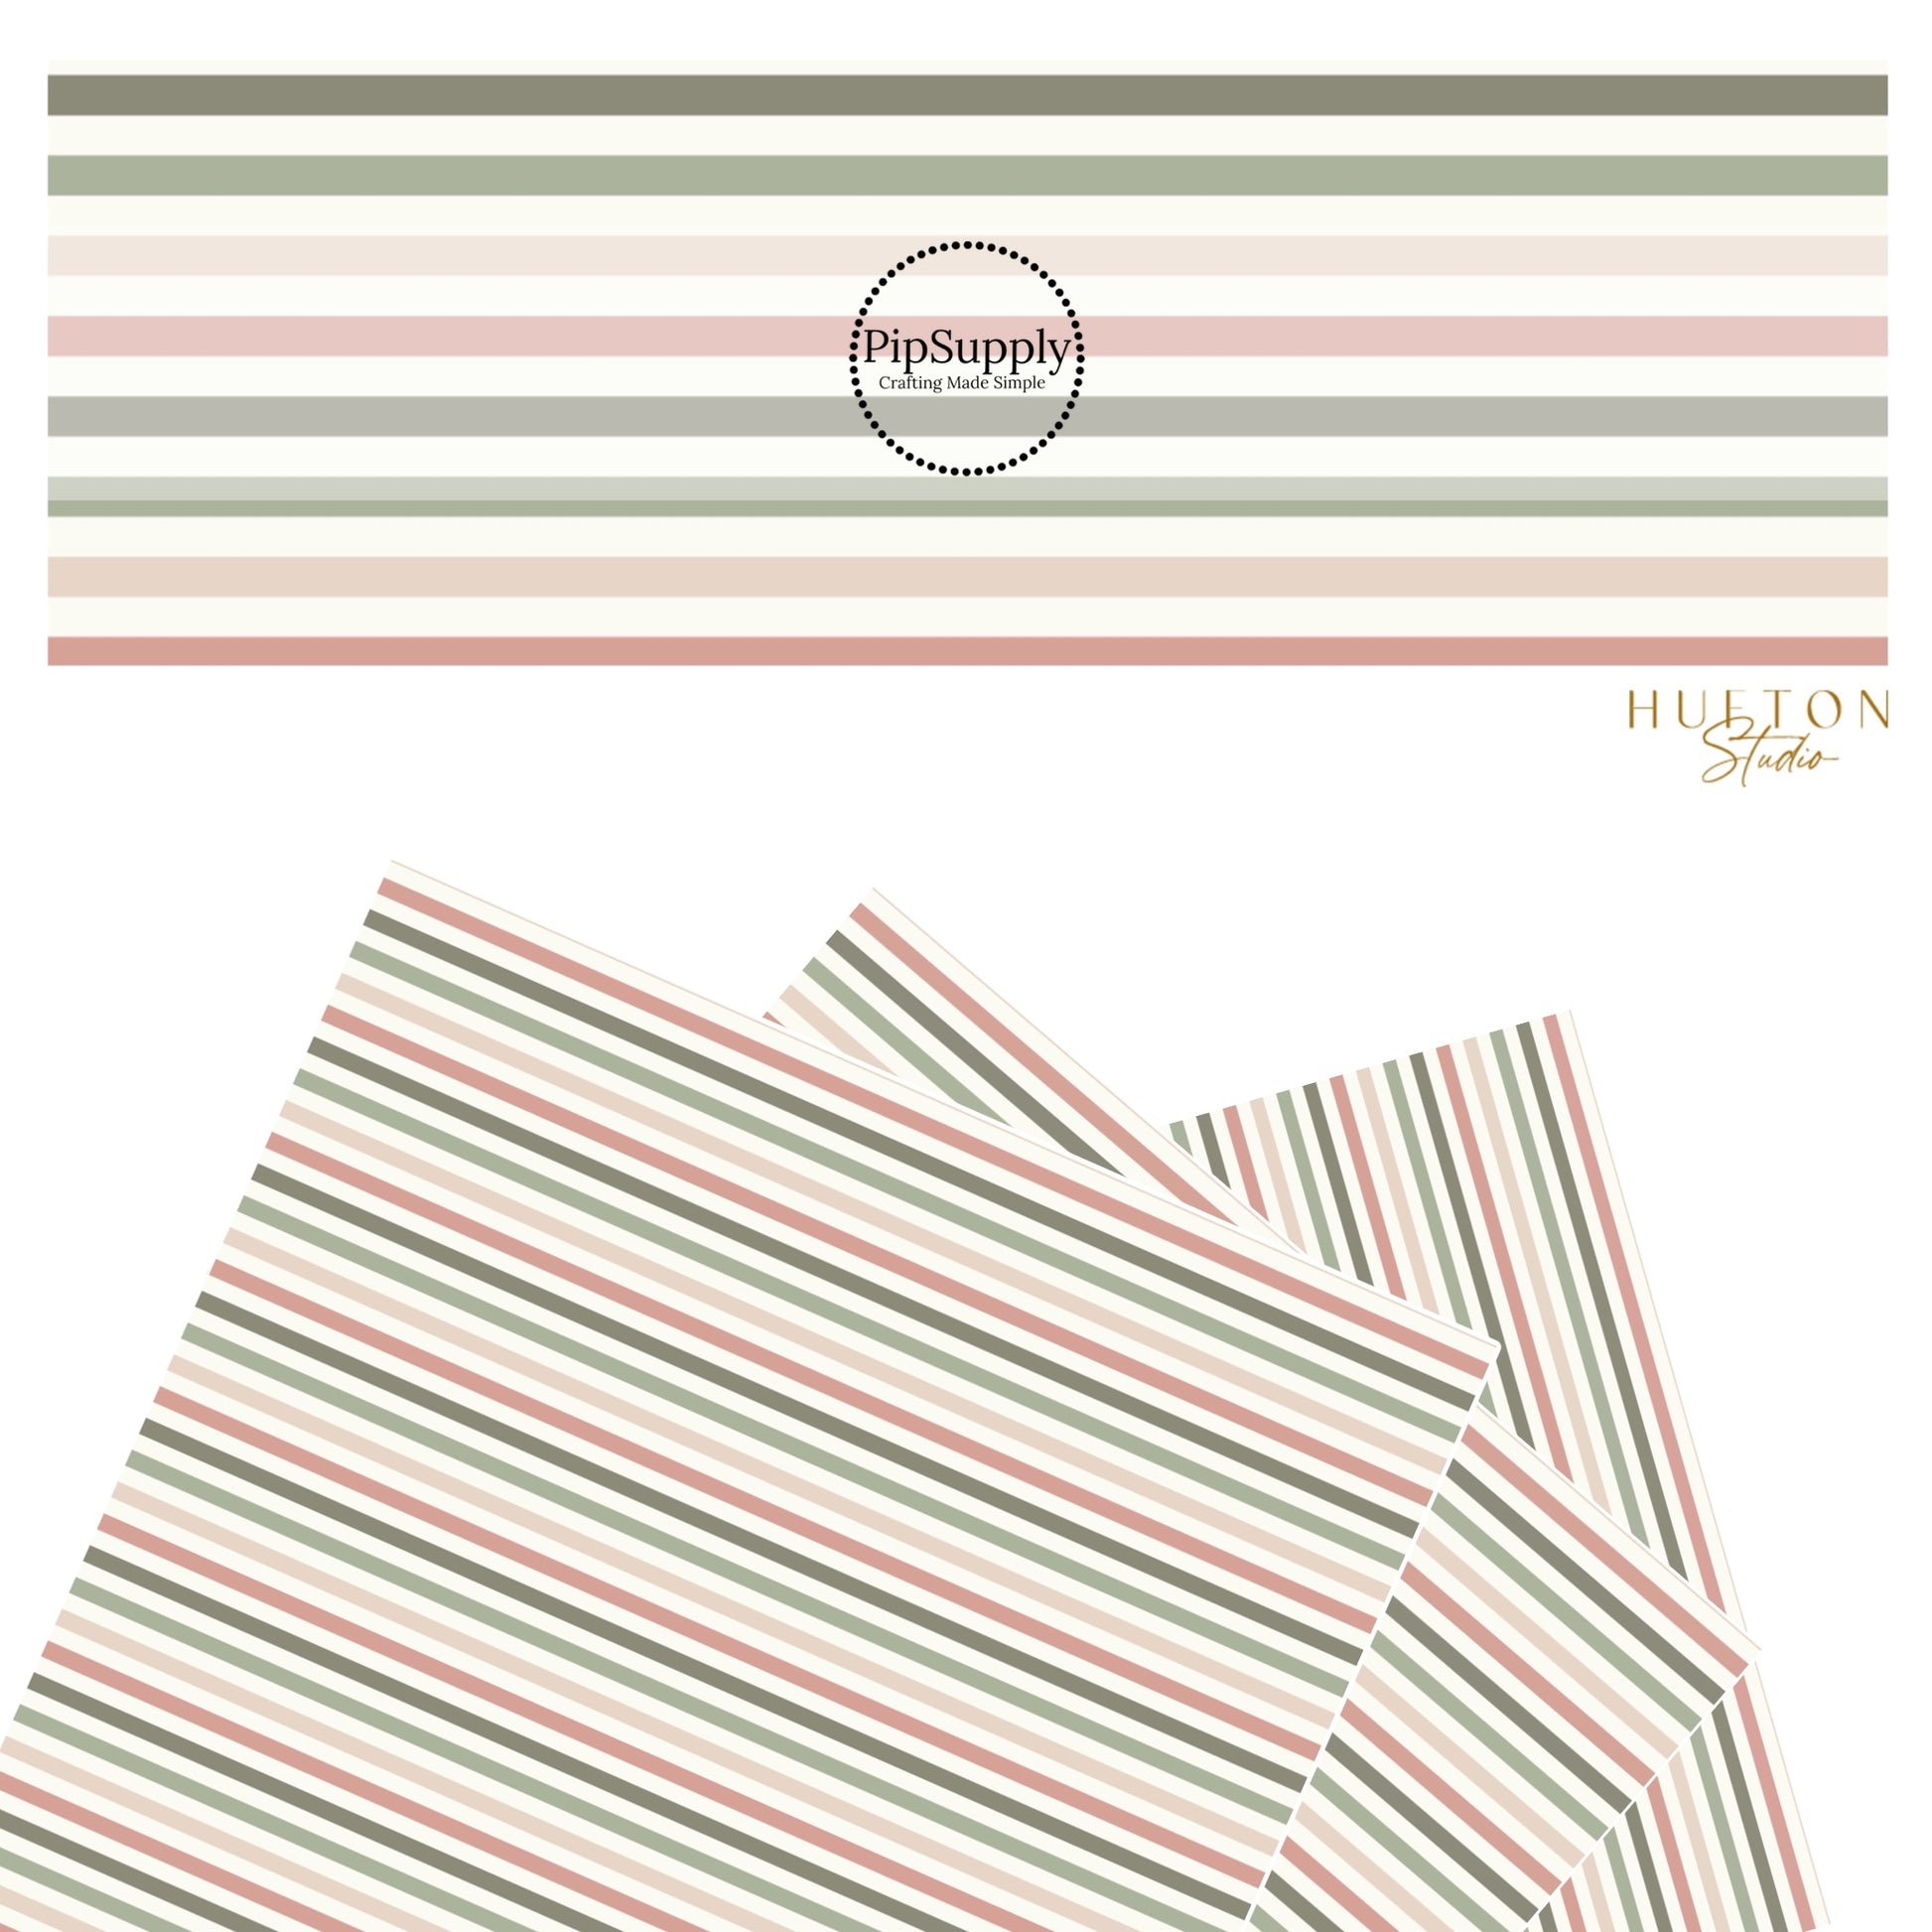 These stripe pattern themed faux leather sheets contain the following design elements: dusty rose, light pink, tan, and taupe stripes on white. Our CPSIA compliant faux leather sheets or rolls can be used for all types of crafting projects.